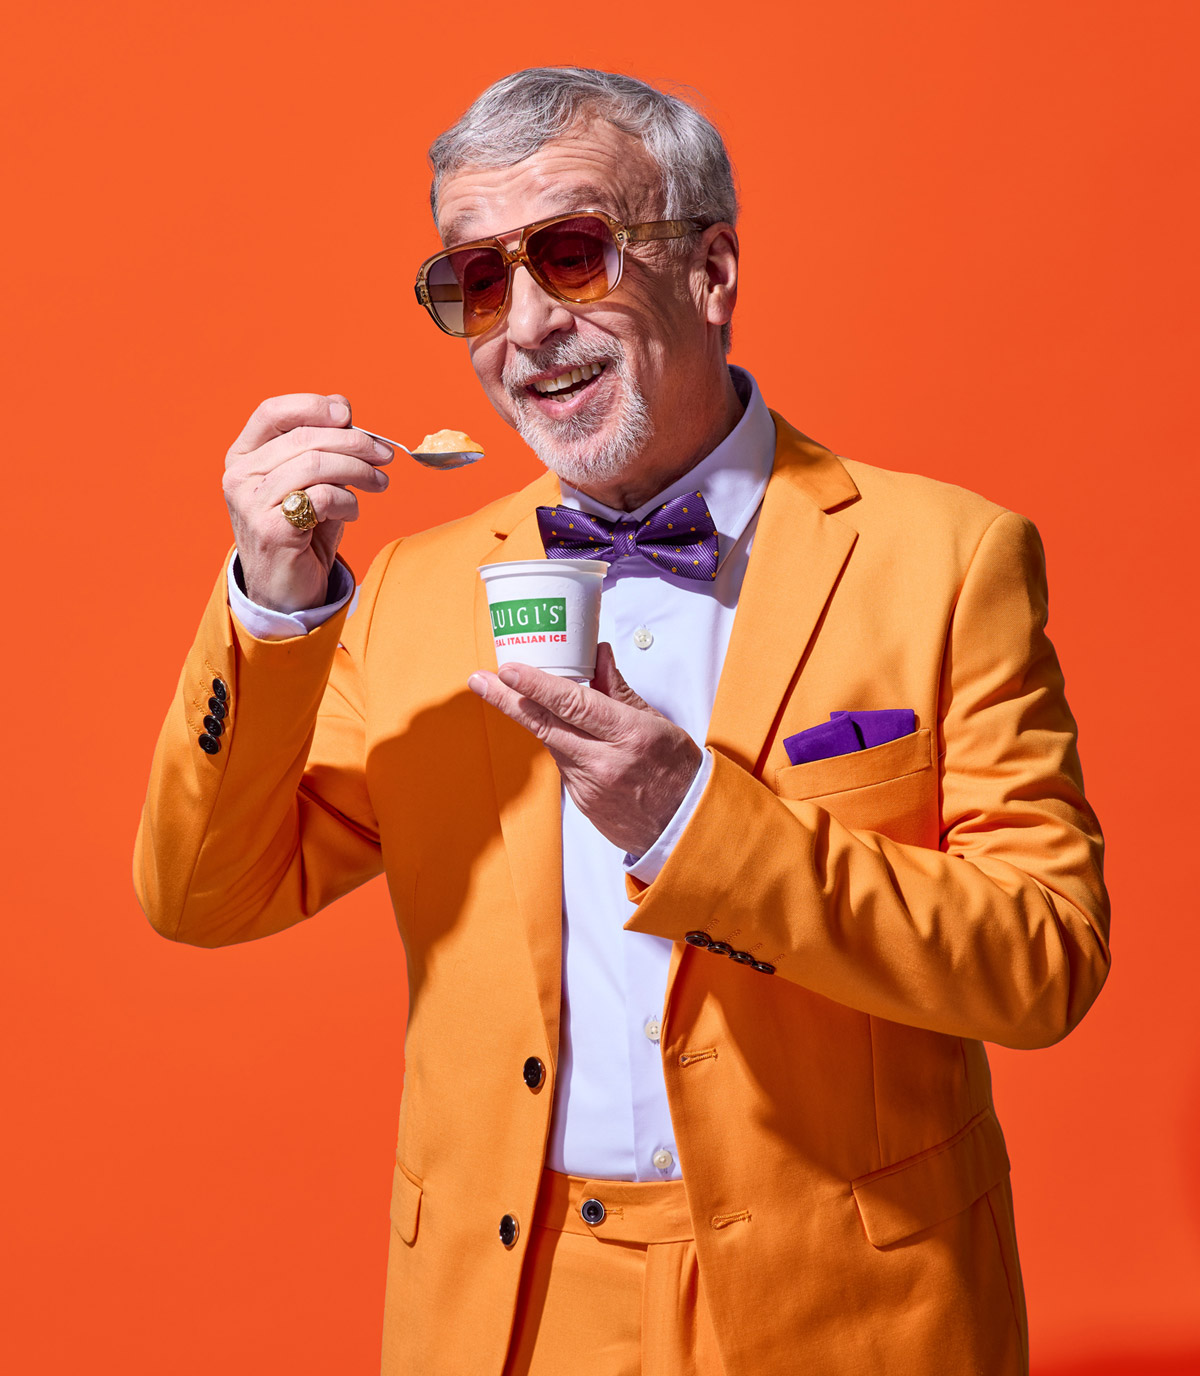 Suave older man, eating mango LUIGI'S Real Italian Ice. Man is in an orange suit with purple bow tie and purple pocket square. He is wearing sunglasses and a pinkie ring. Background is a darker orange.